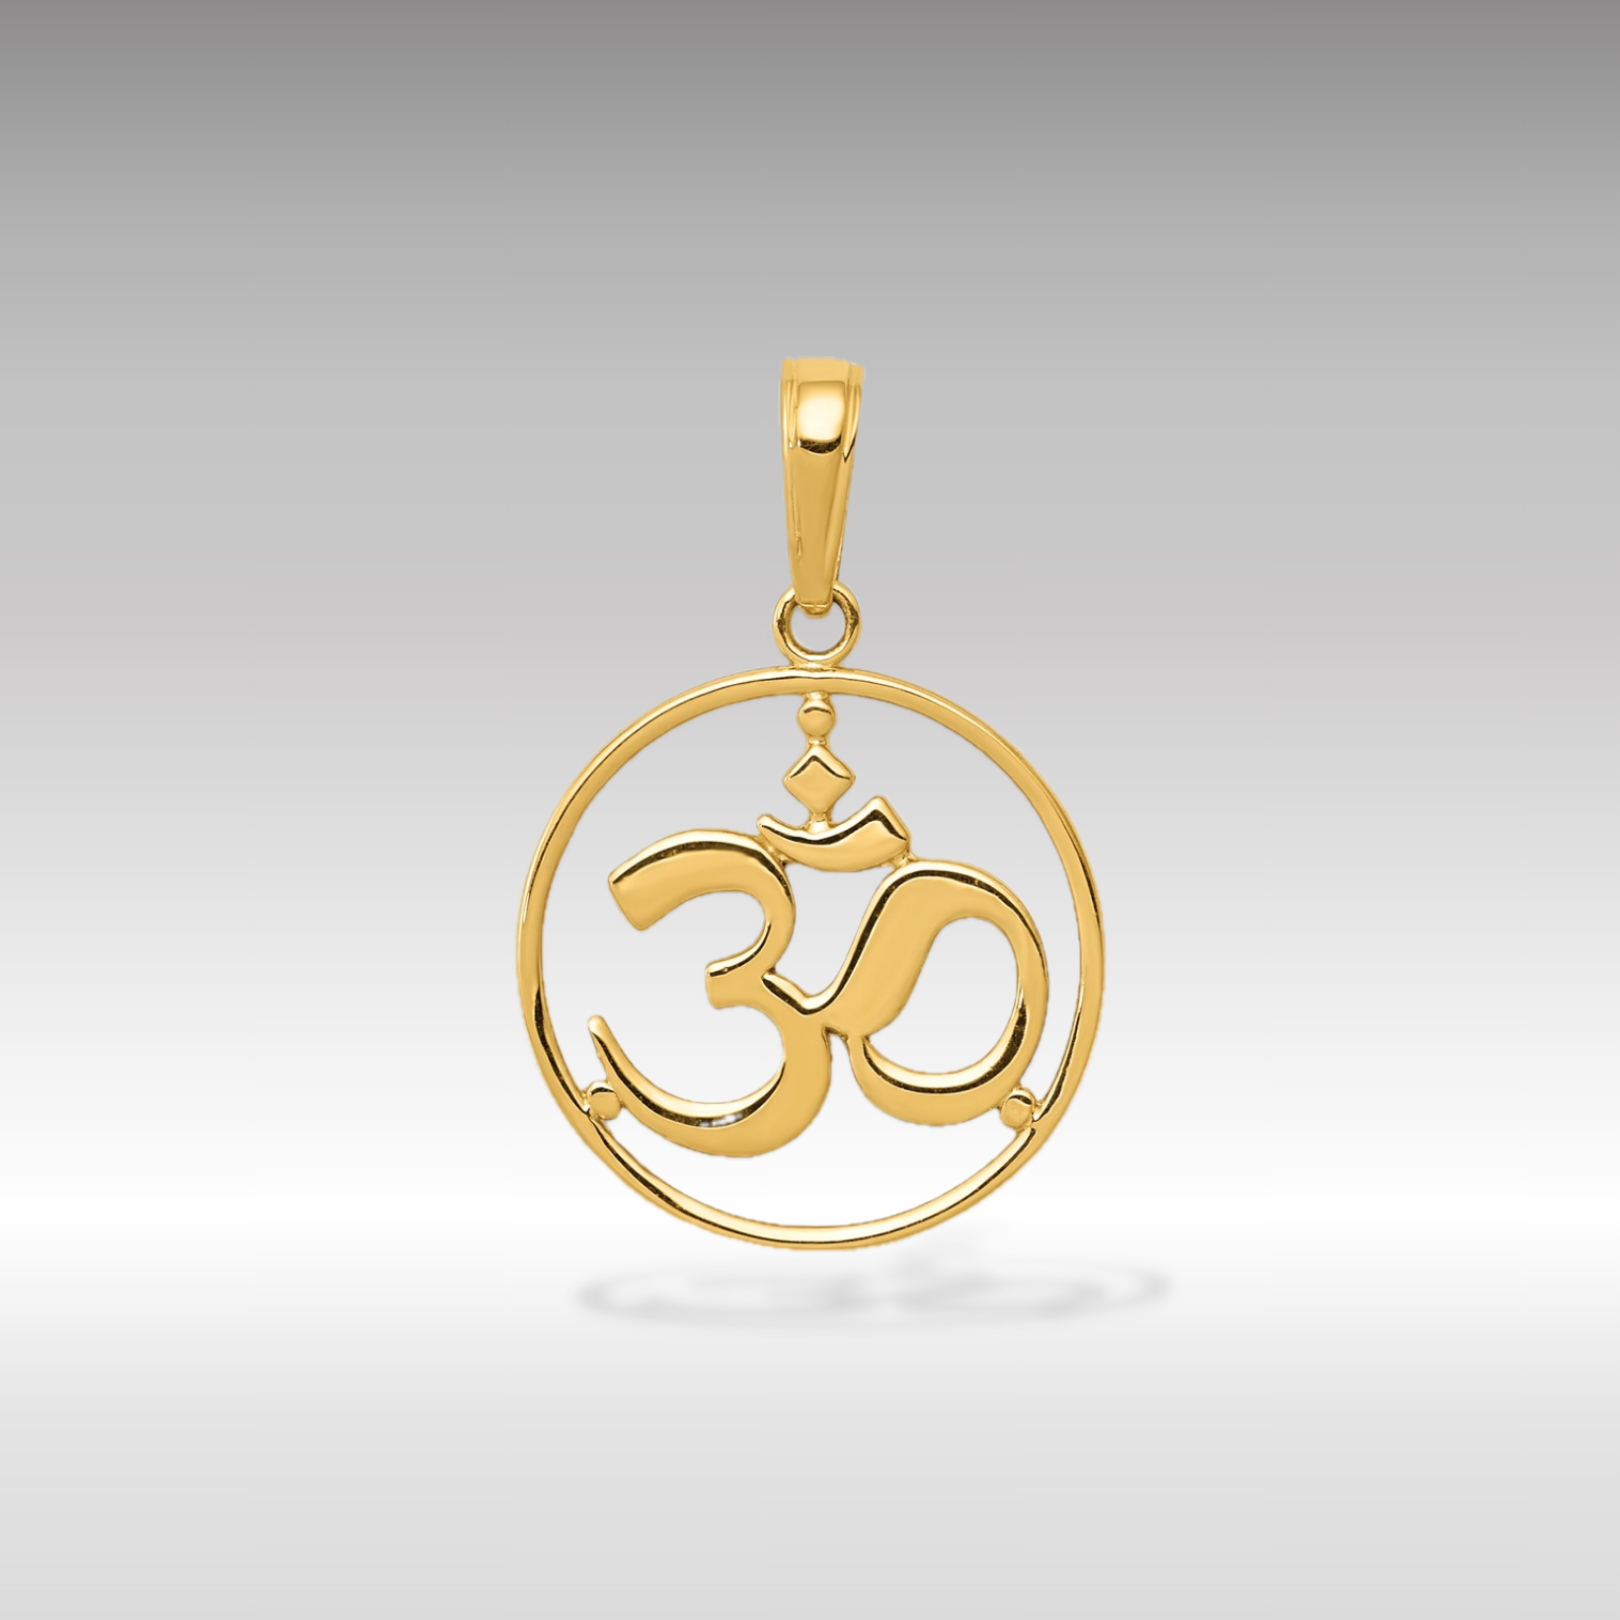 14K Gold Cut-Out Round Frame Om Symbol Pendant - Charlie & Co. Jewelry